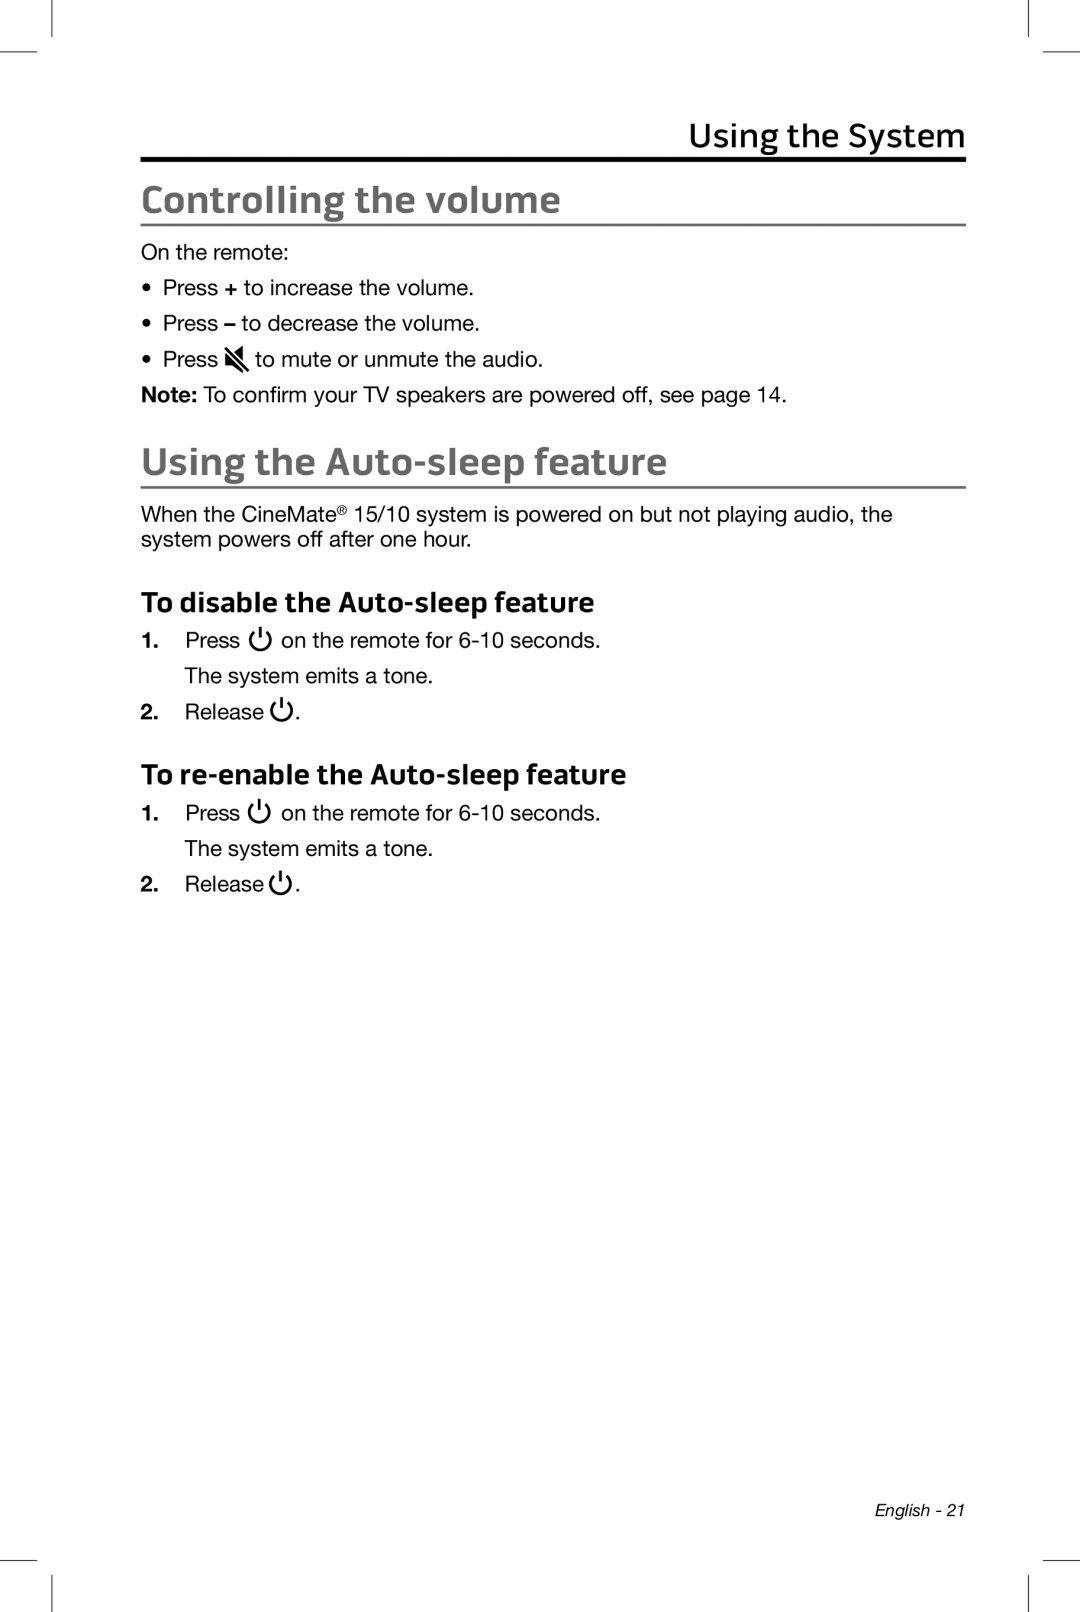 Bose CineMate 15/10 manual Controlling the volume, Using the Auto-sleepfeature, Using the System 